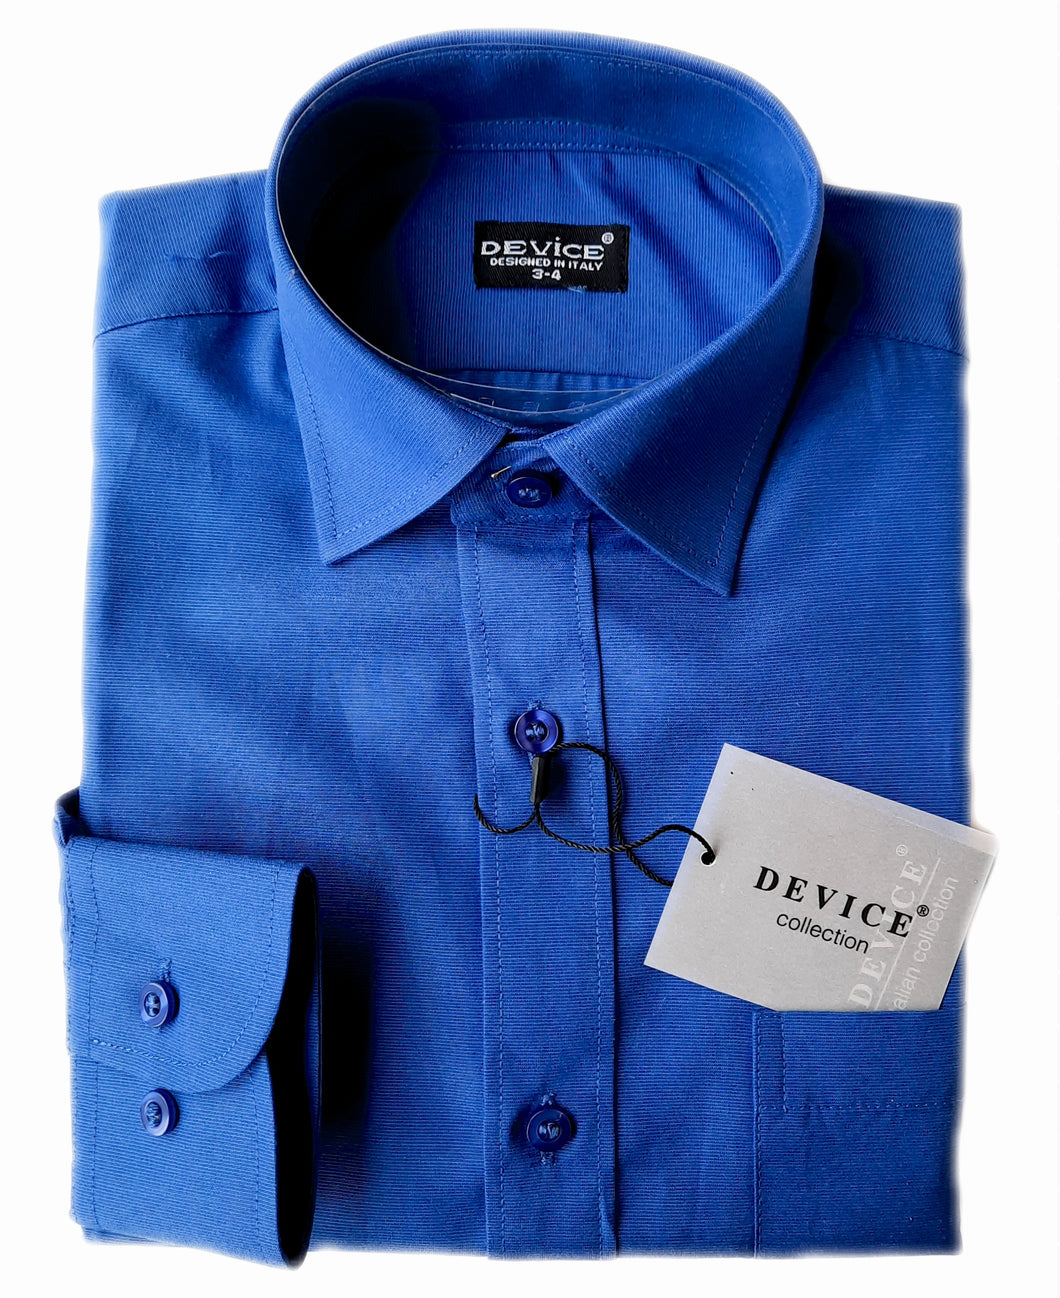 Boy's communion shirt in dark blue. A classic, long sleeved shirt in a deep blue shade. Smooth fabric, classic non-fitted style. Two button cuff which allows for adjustment to suit. Perfect for special dressing including First Communion. Made by Device.Size labelling is not age.